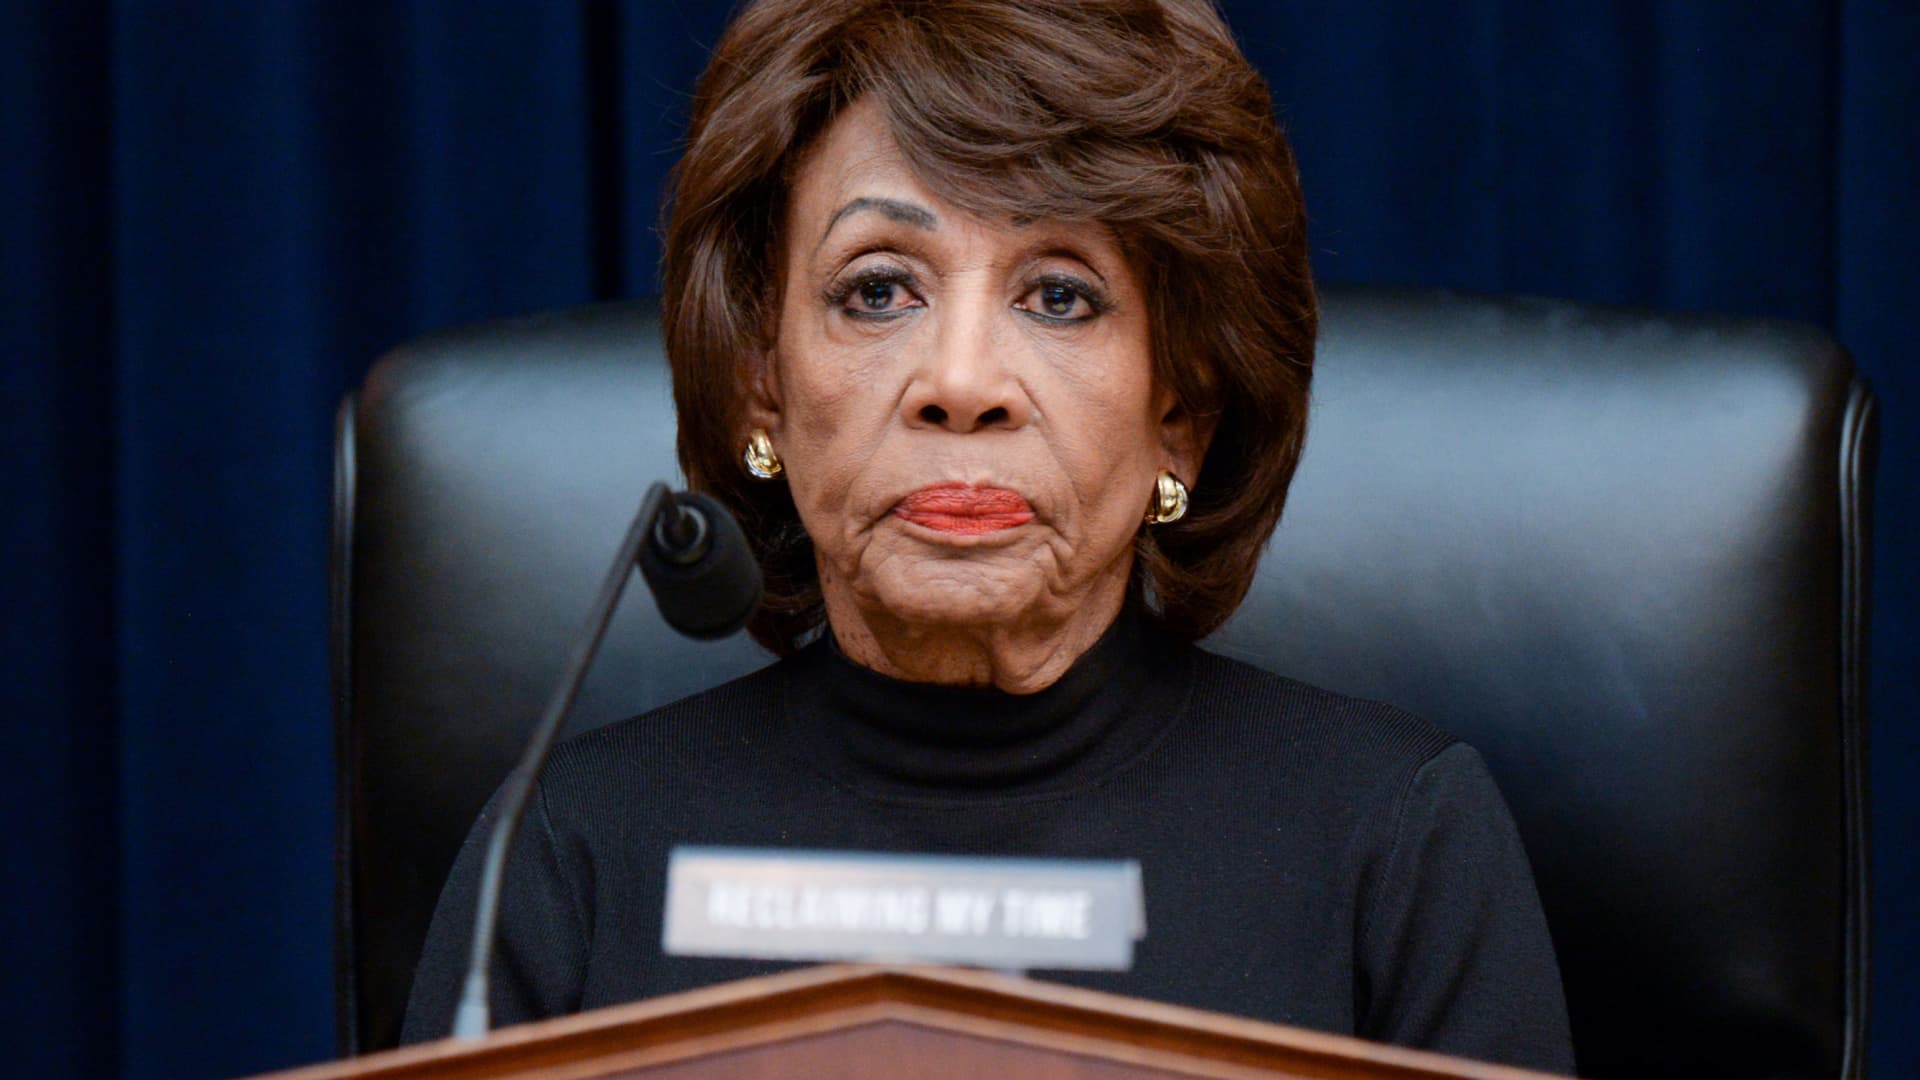 Maxine Waters doesn’t plan to subpoena Bankman-Fried to testify